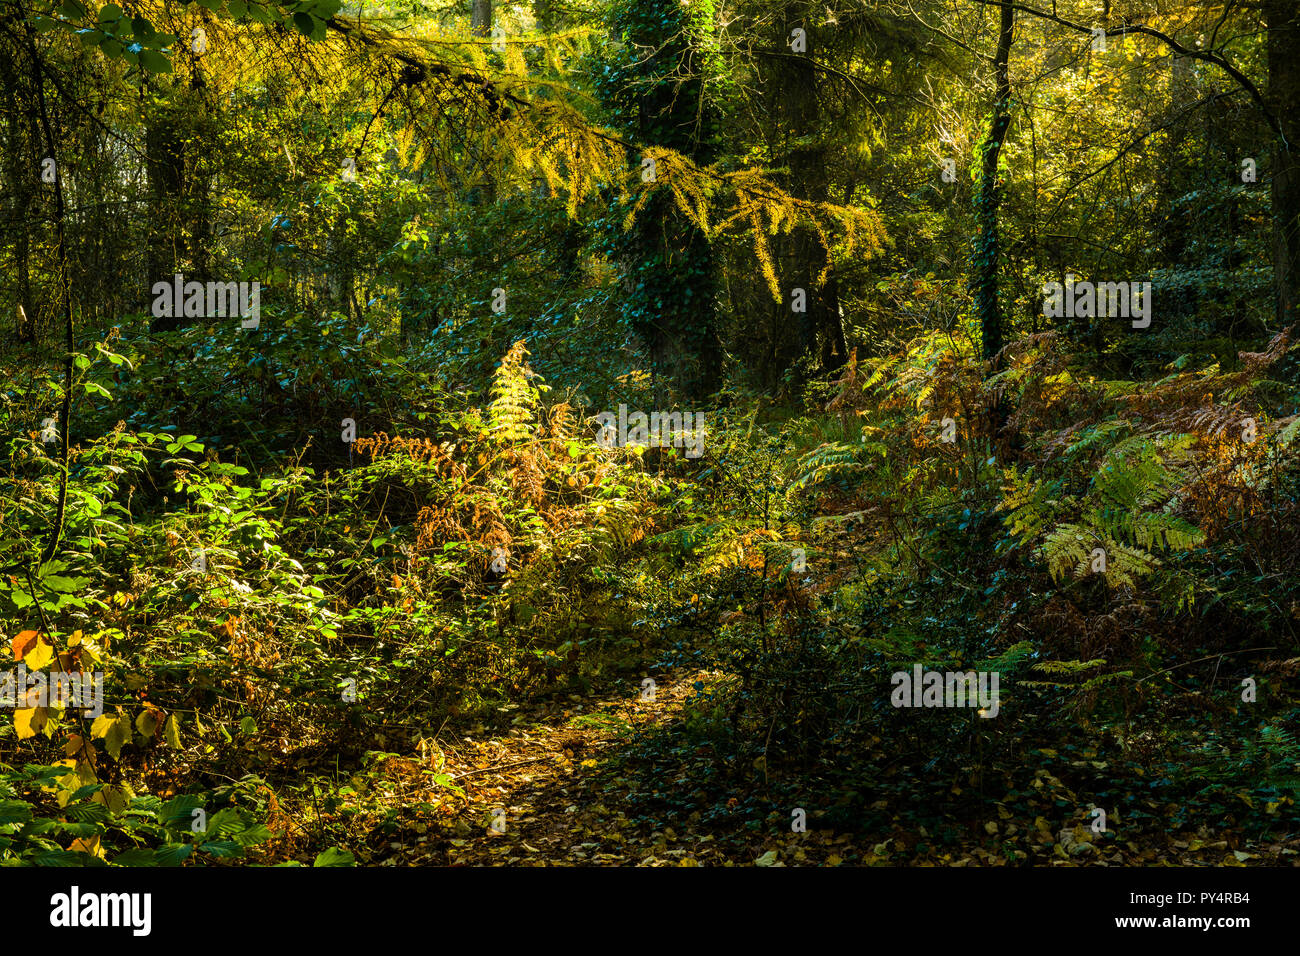 Autumn Photographs of the Hensol Forest in South Wales Stock Photo